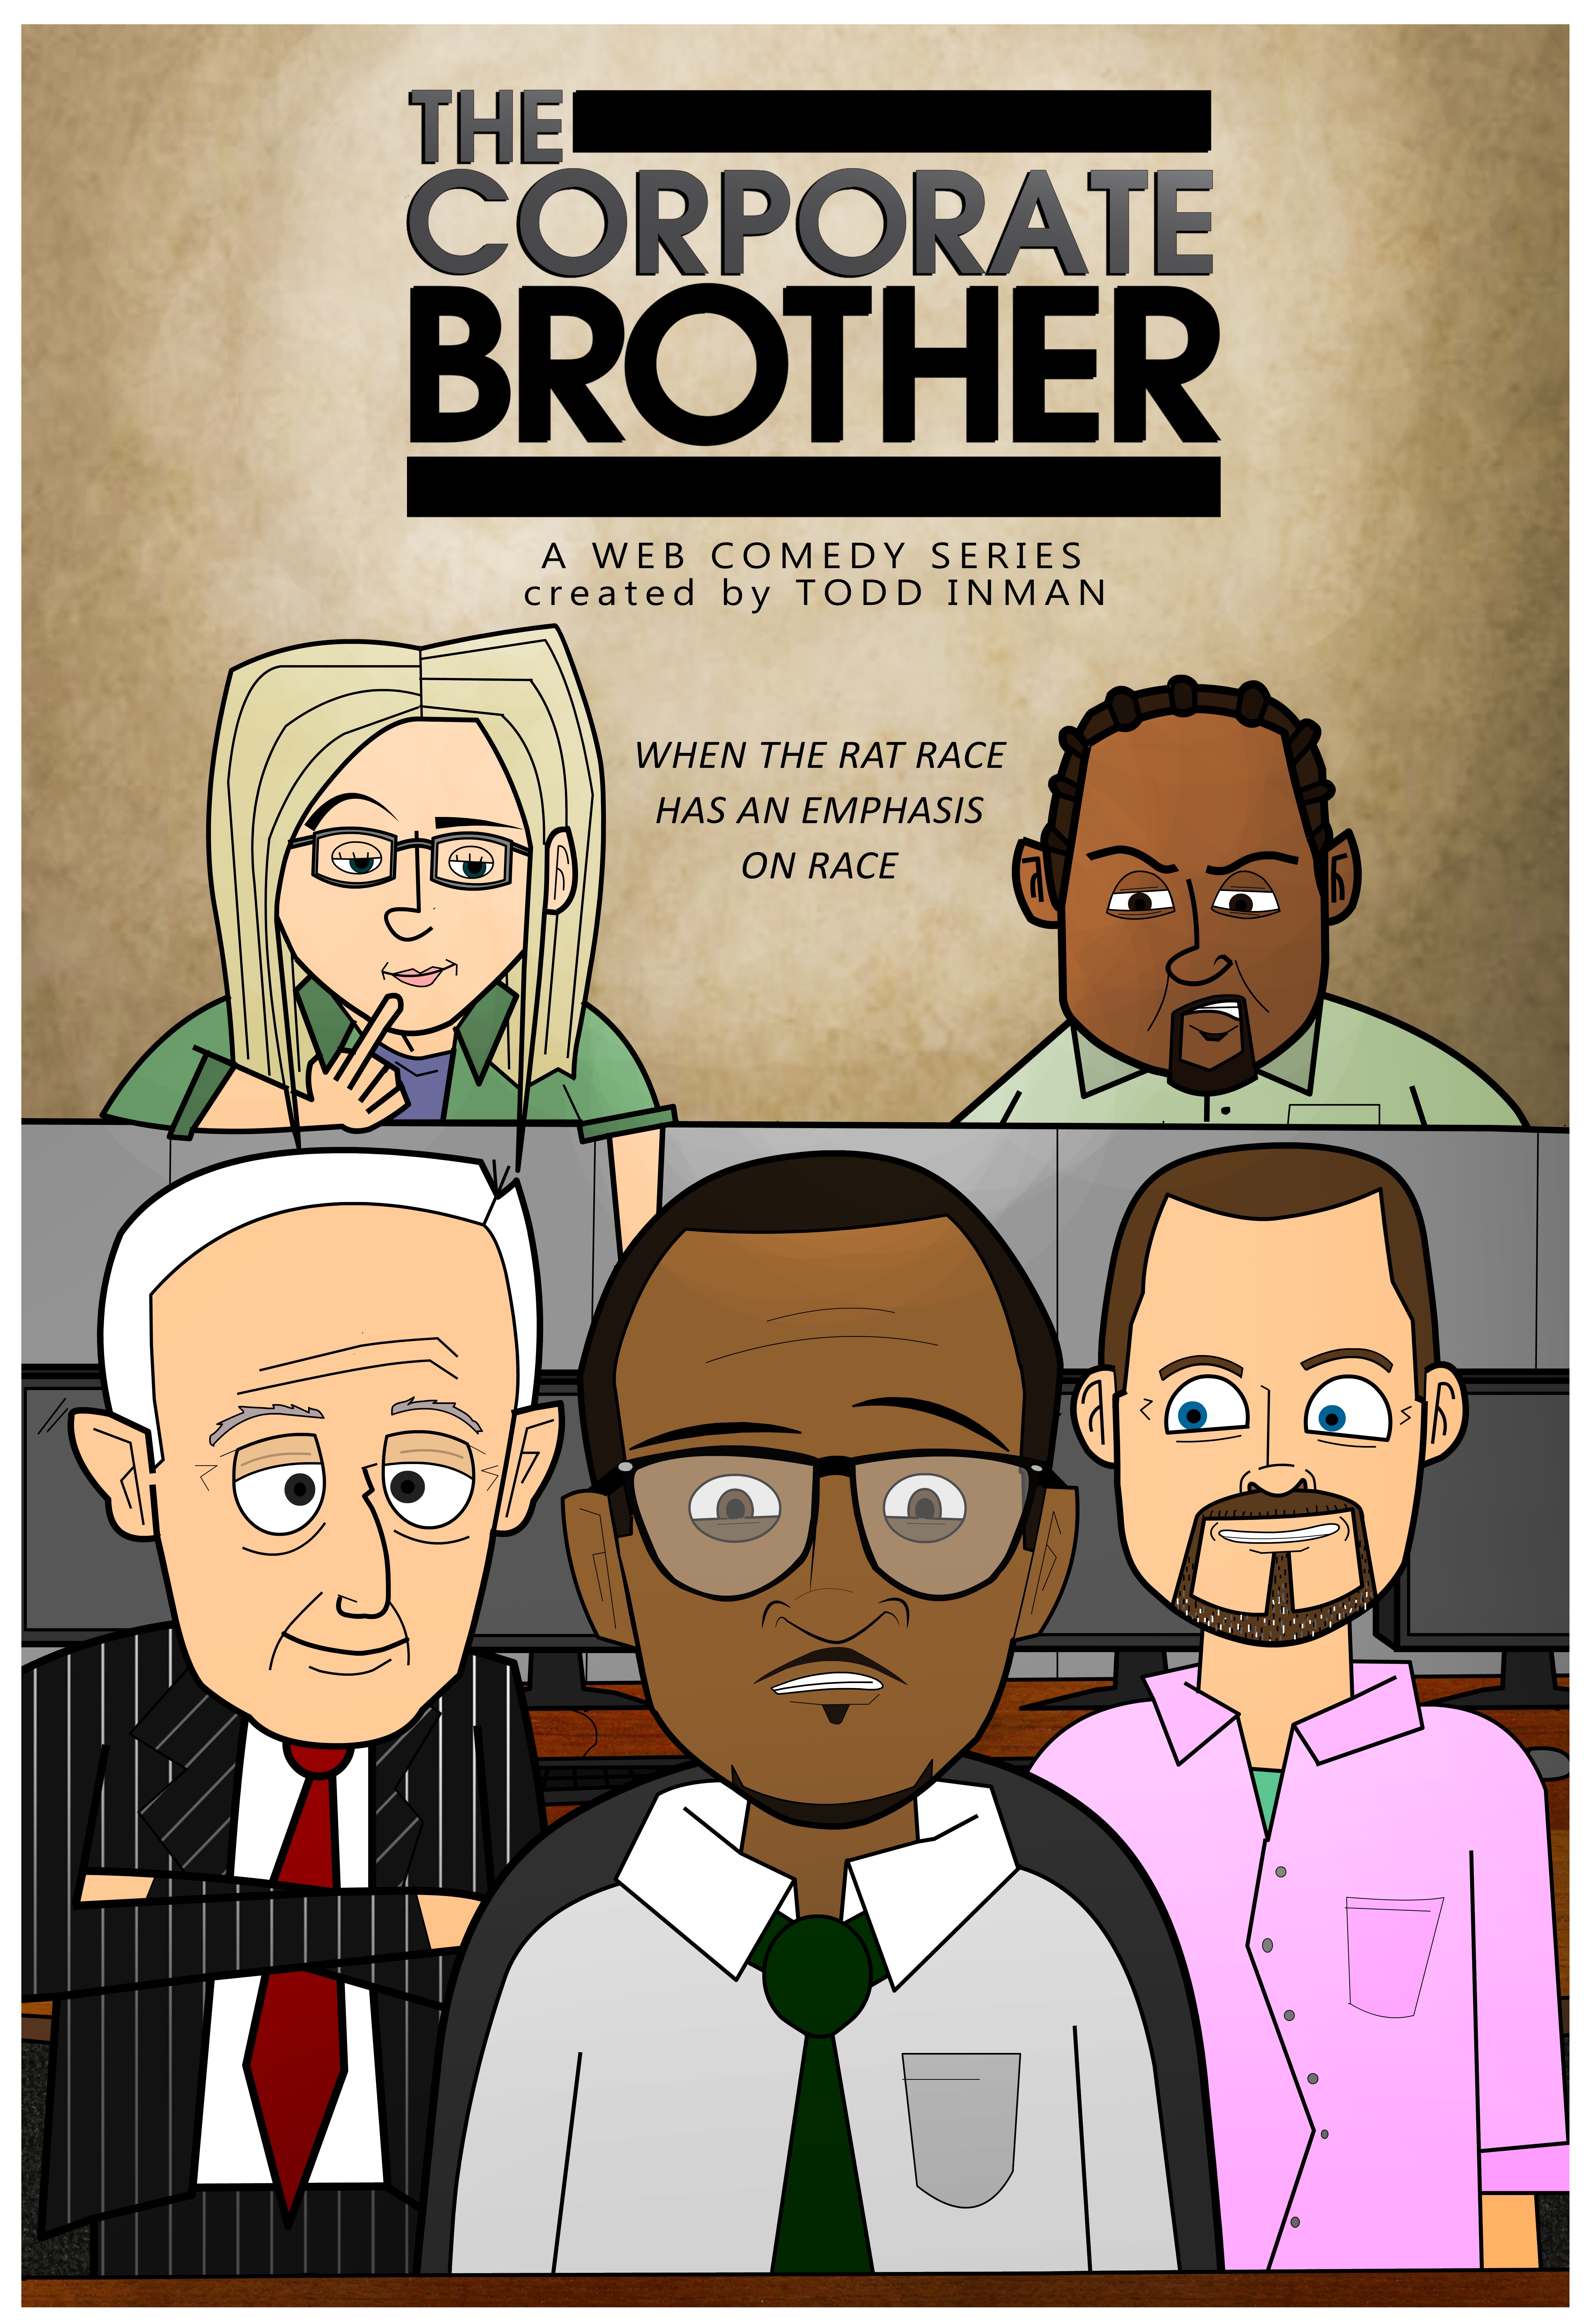 The Corporate Brother Web Series Poster.